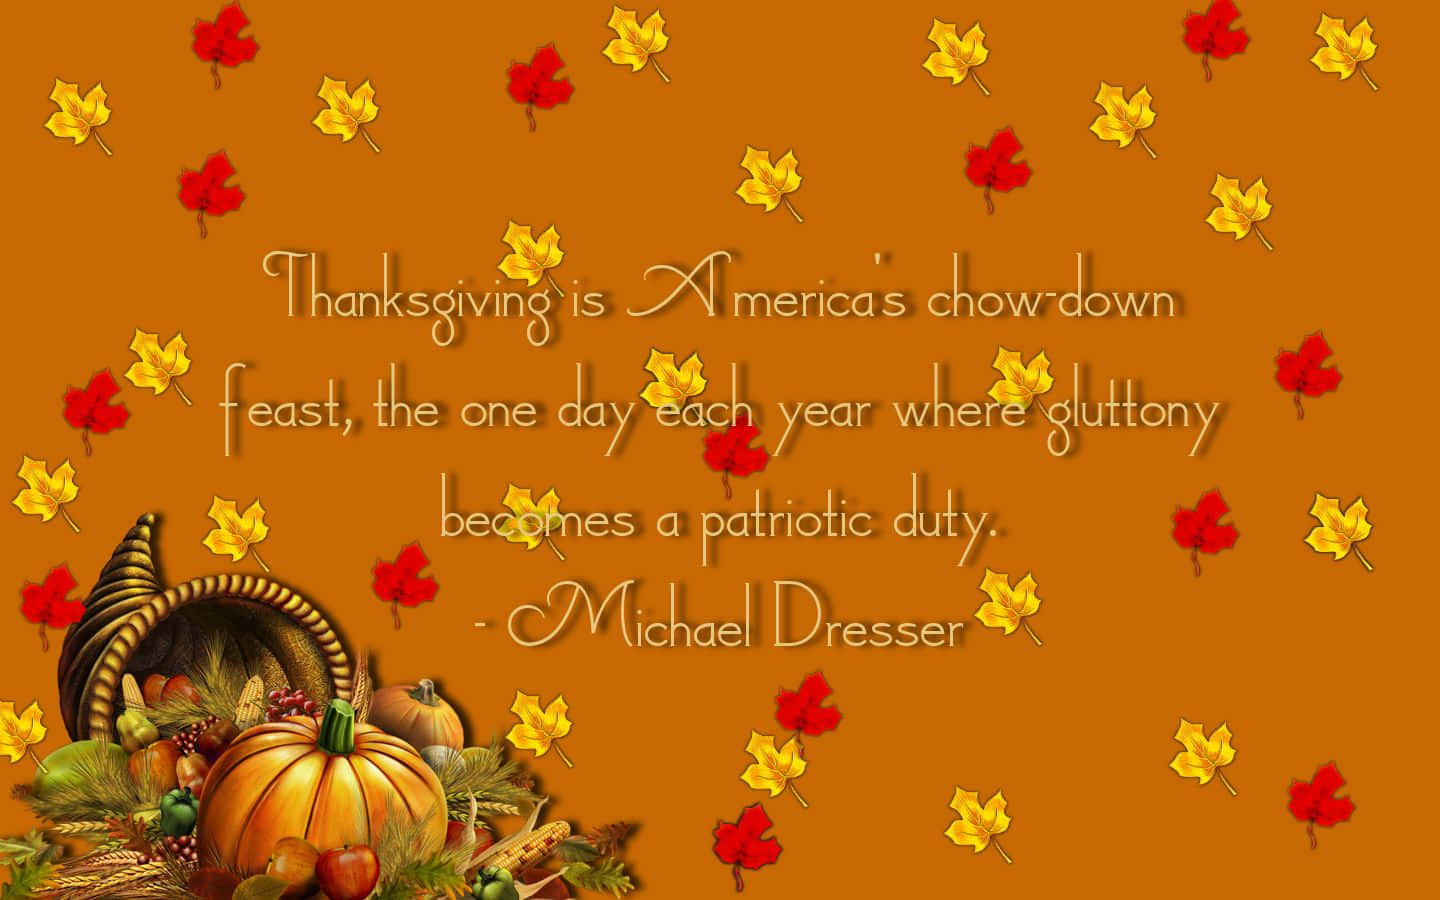 Feel the thankful spirit of the Thanksgiving holiday with this beautiful fall background